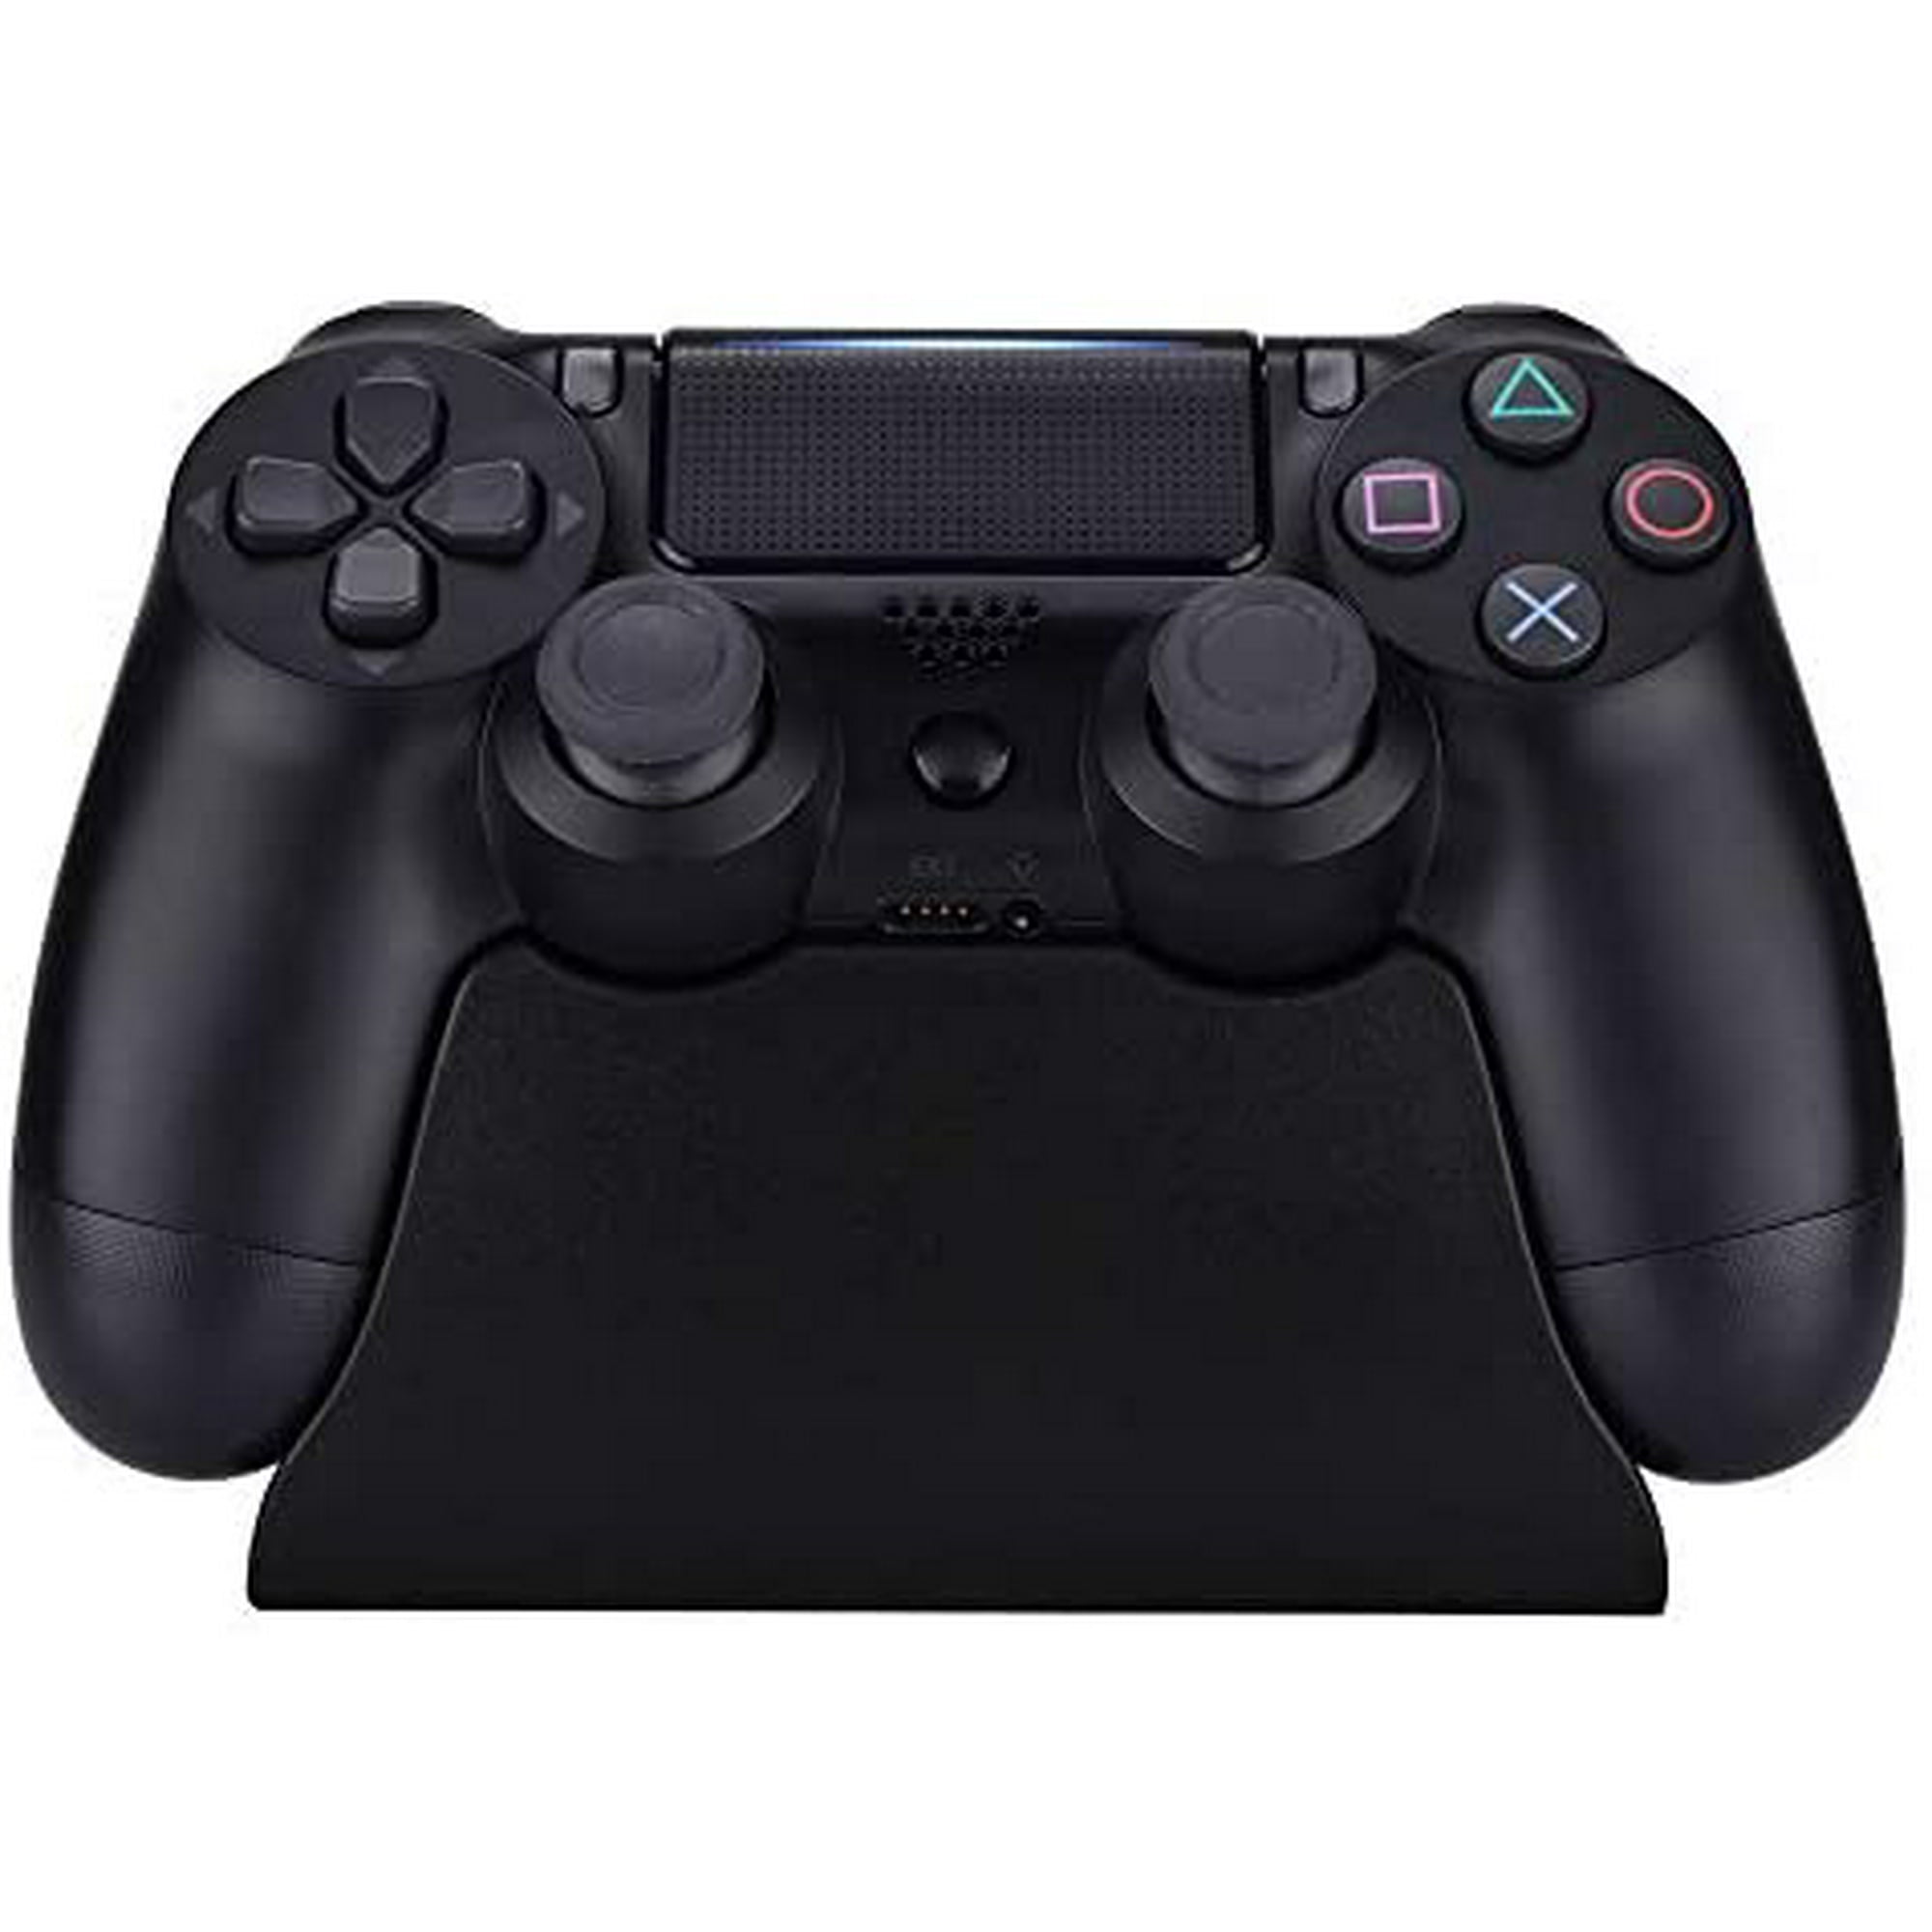 Solid Black Controller Display for Playstation 4, Gamepad Accessories Desk Holder for PS4 Slim PS4 | Walmart Canada